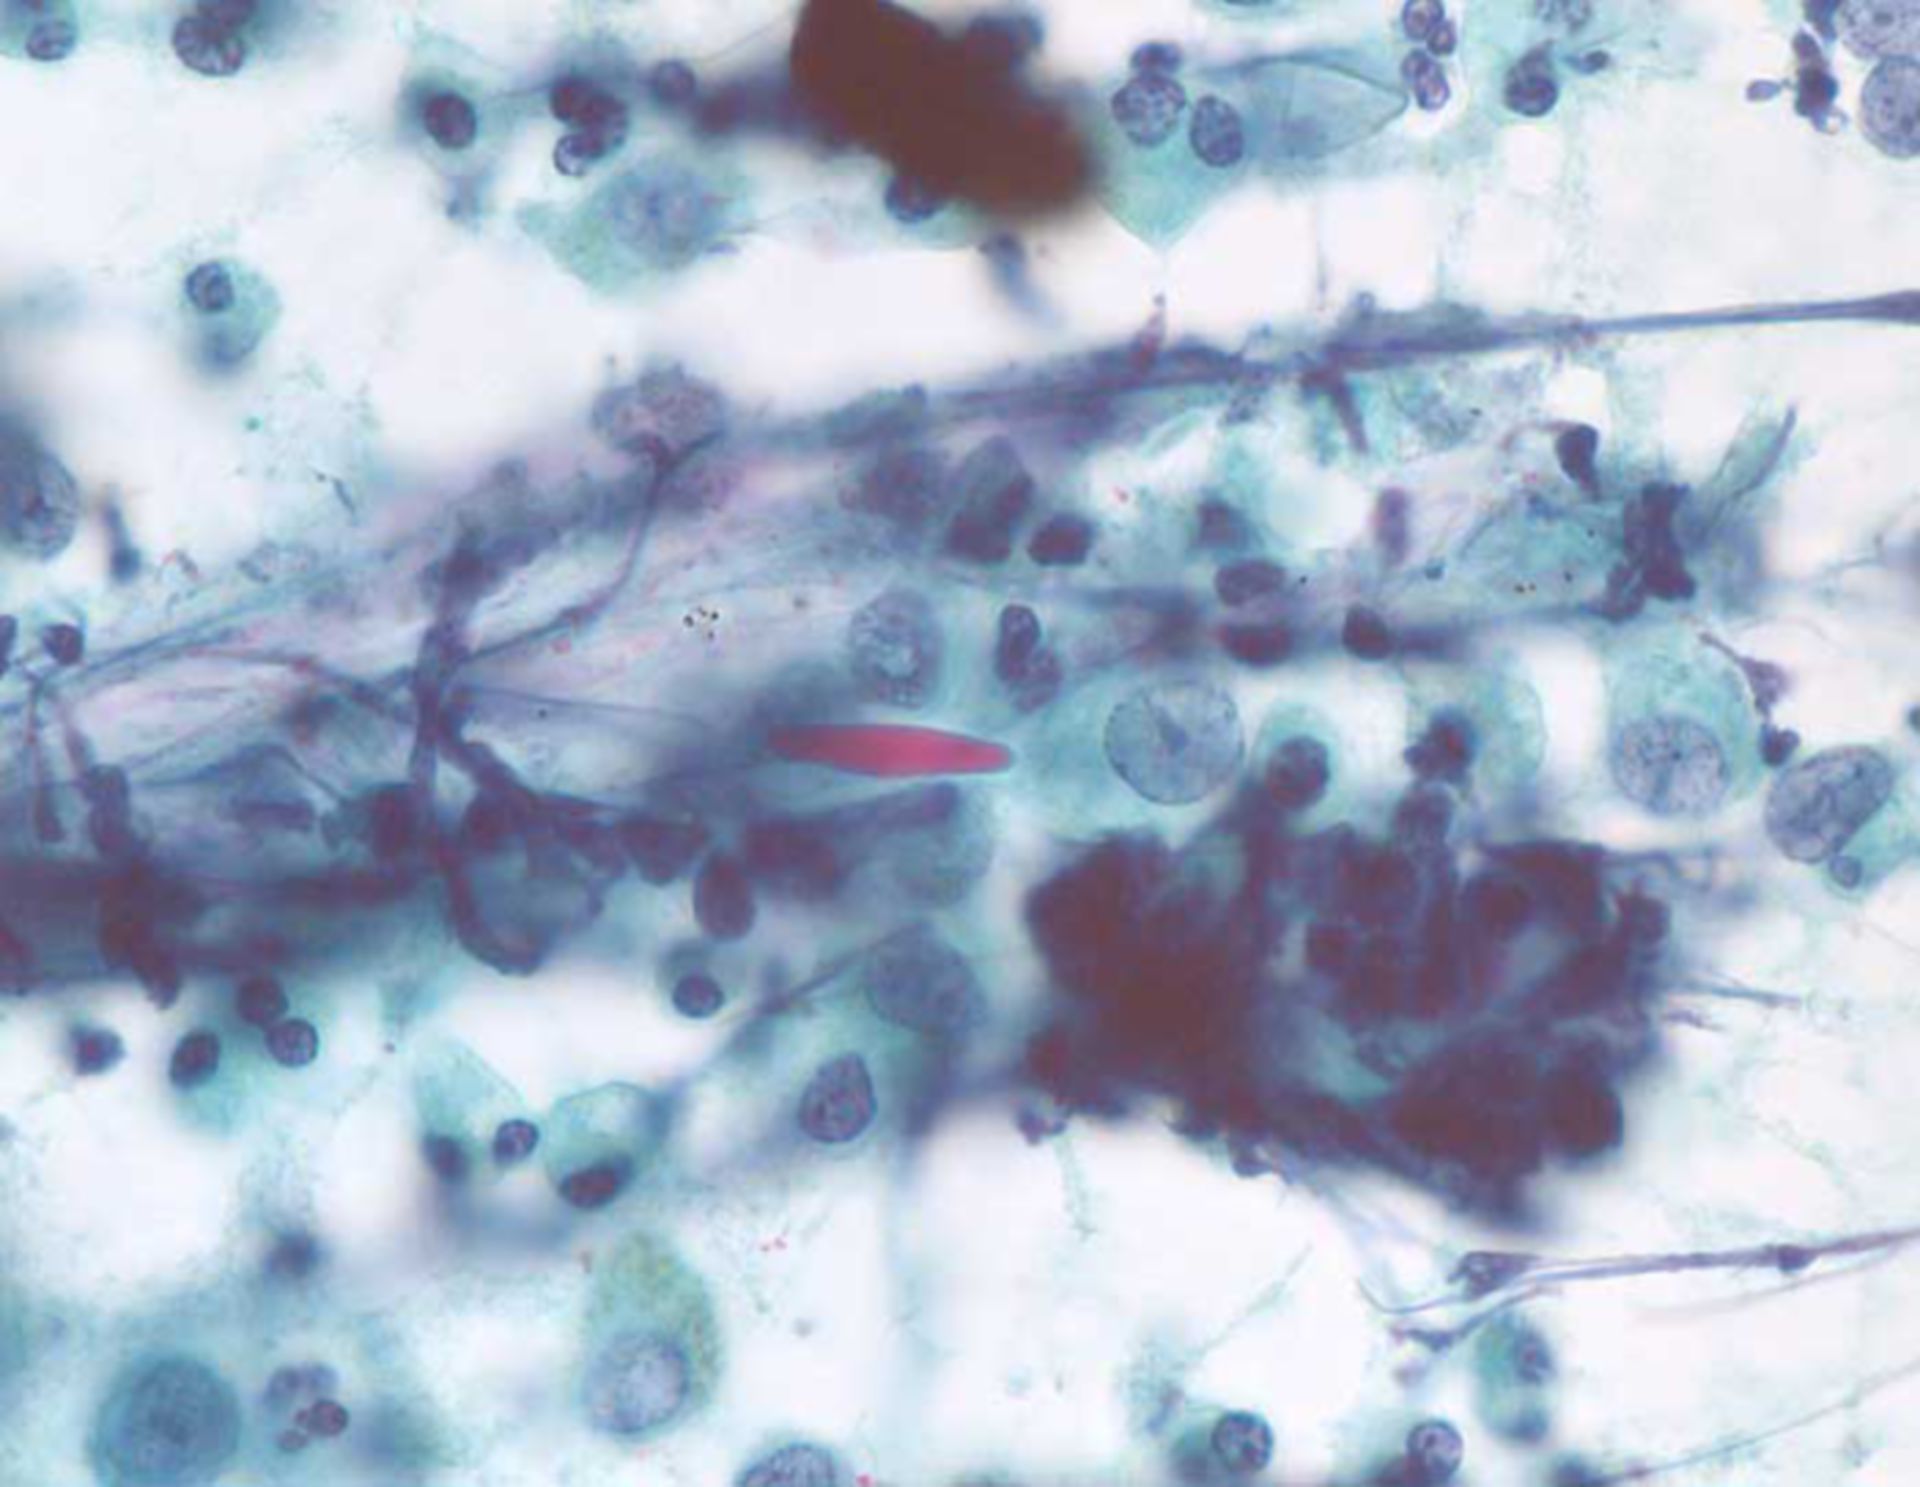 Eosinophilia in the setting of Churg-Strauss vasculitis: Charcot-Leyden crystal